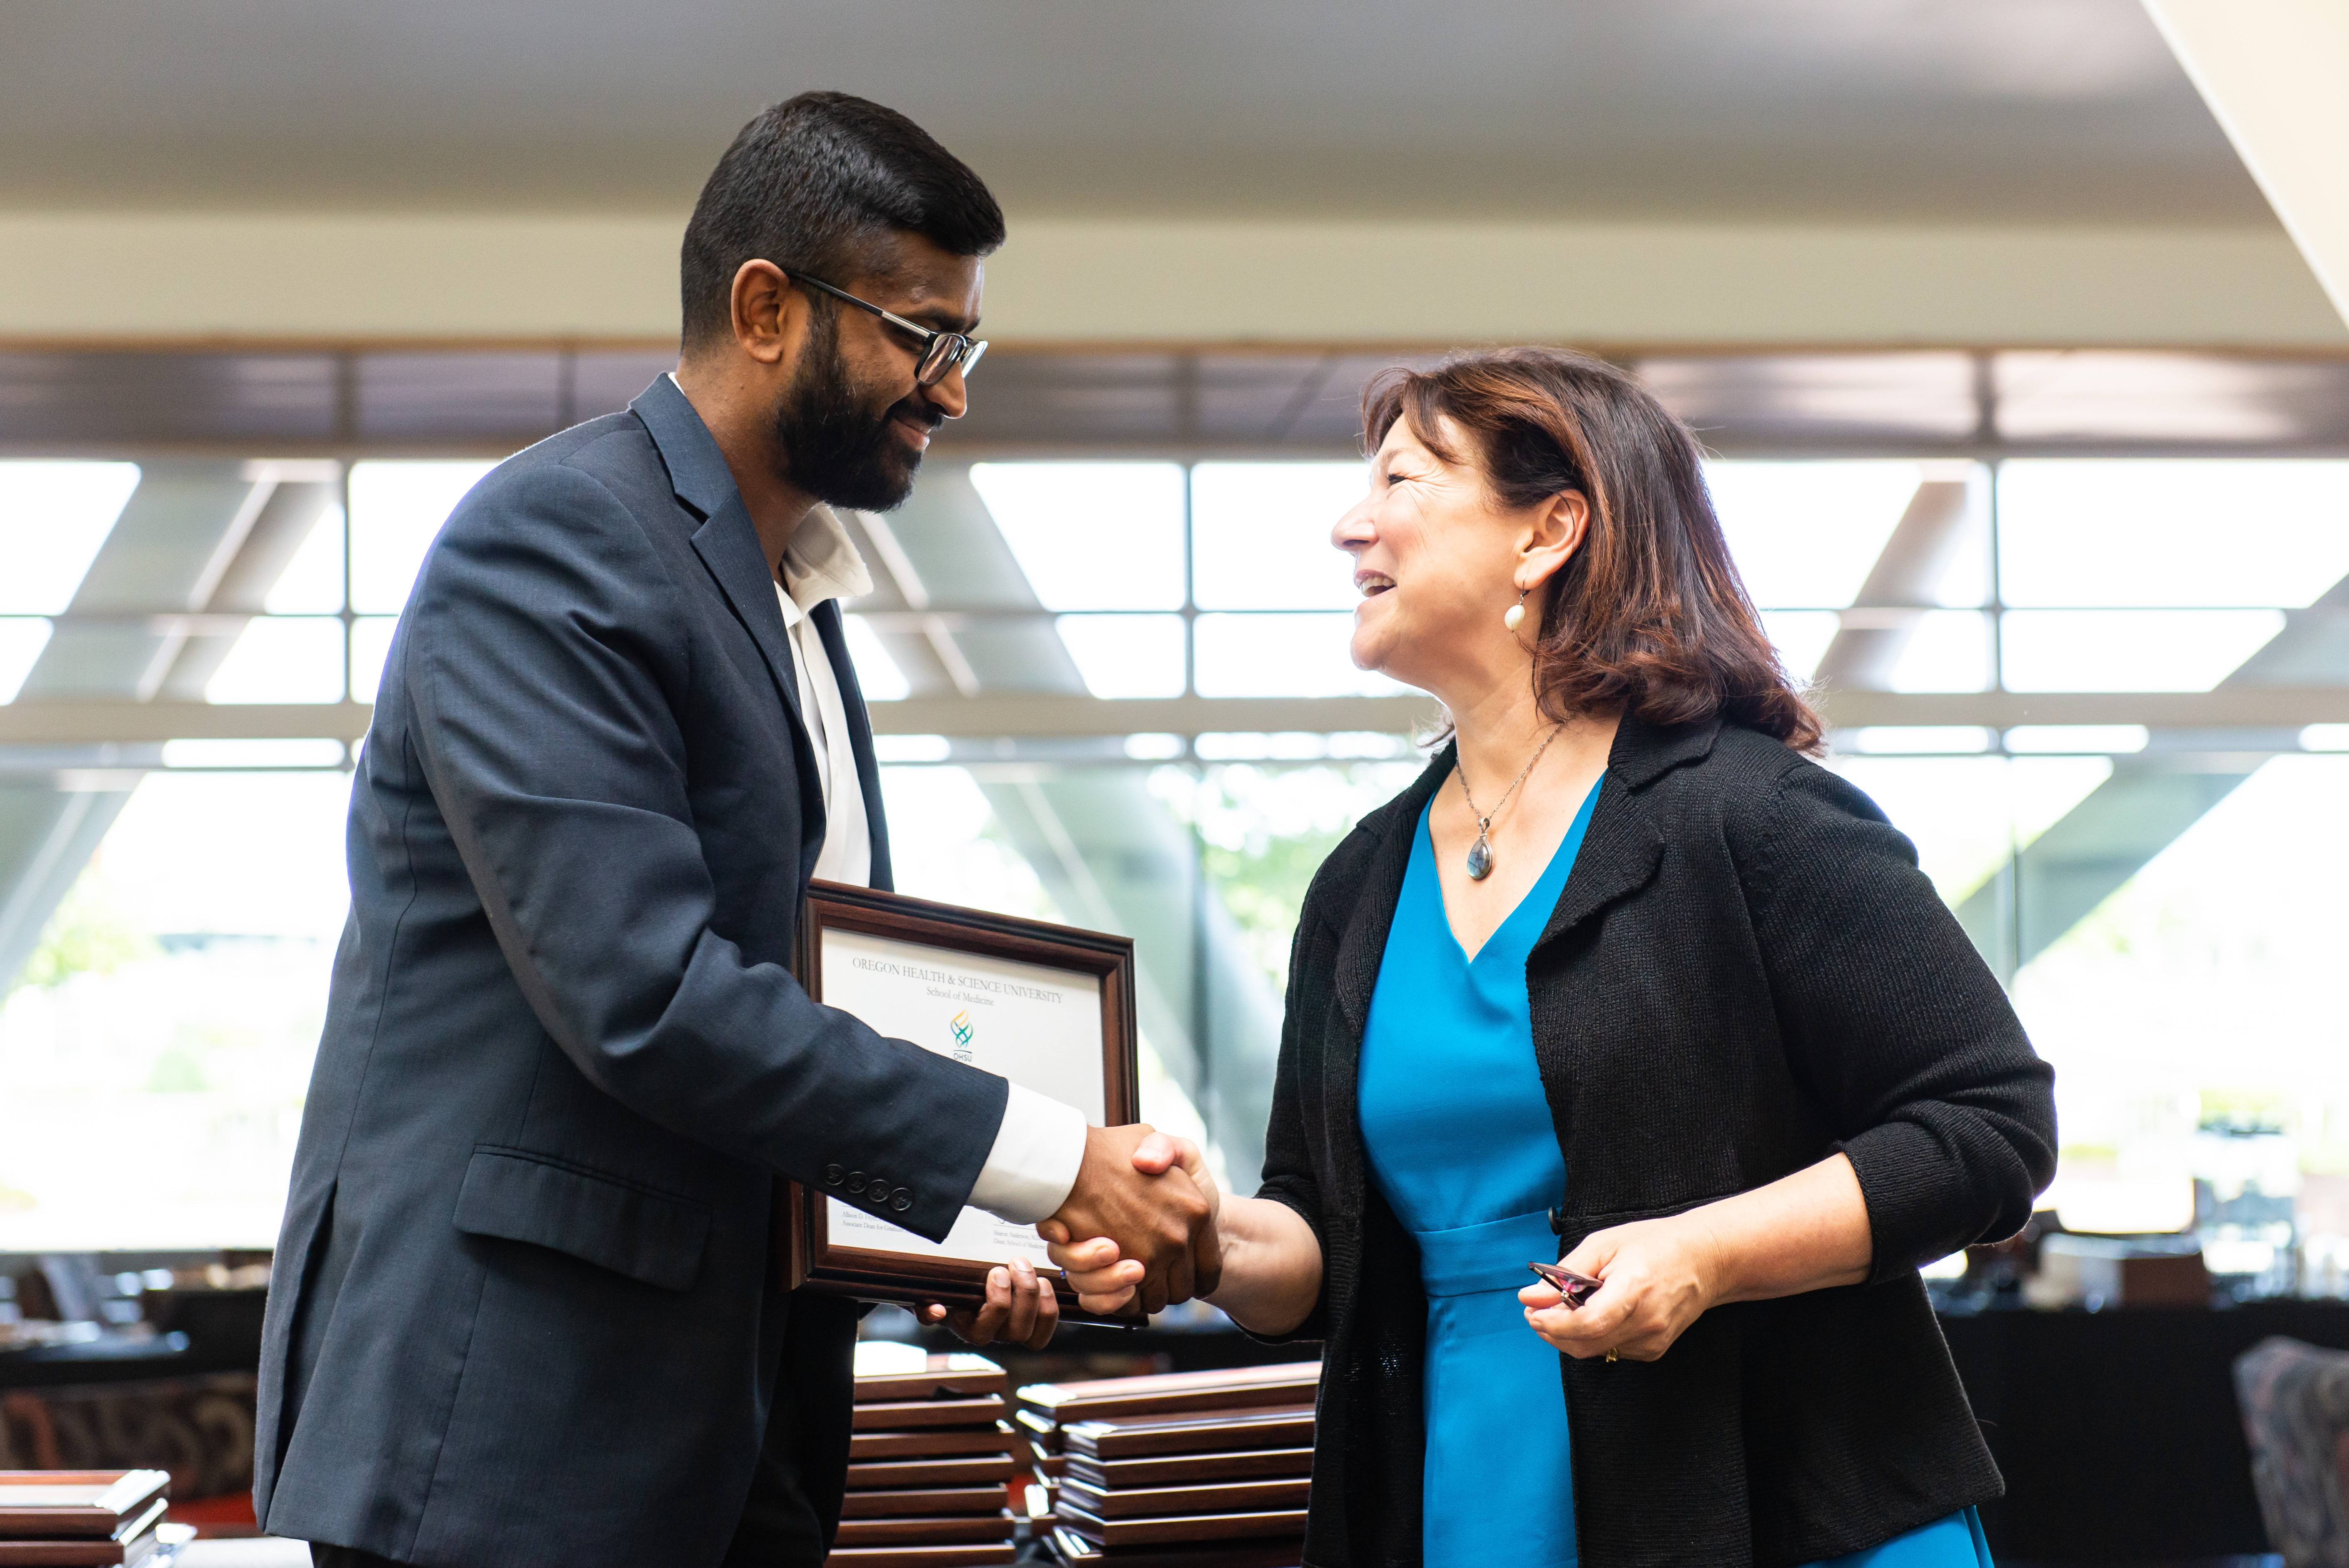 SOM Honors and Awards 2019 - Raja Cholan of Department of Medical Informatics and Clinical Epidemiology (DMICE) with Dr. Allison Fryer